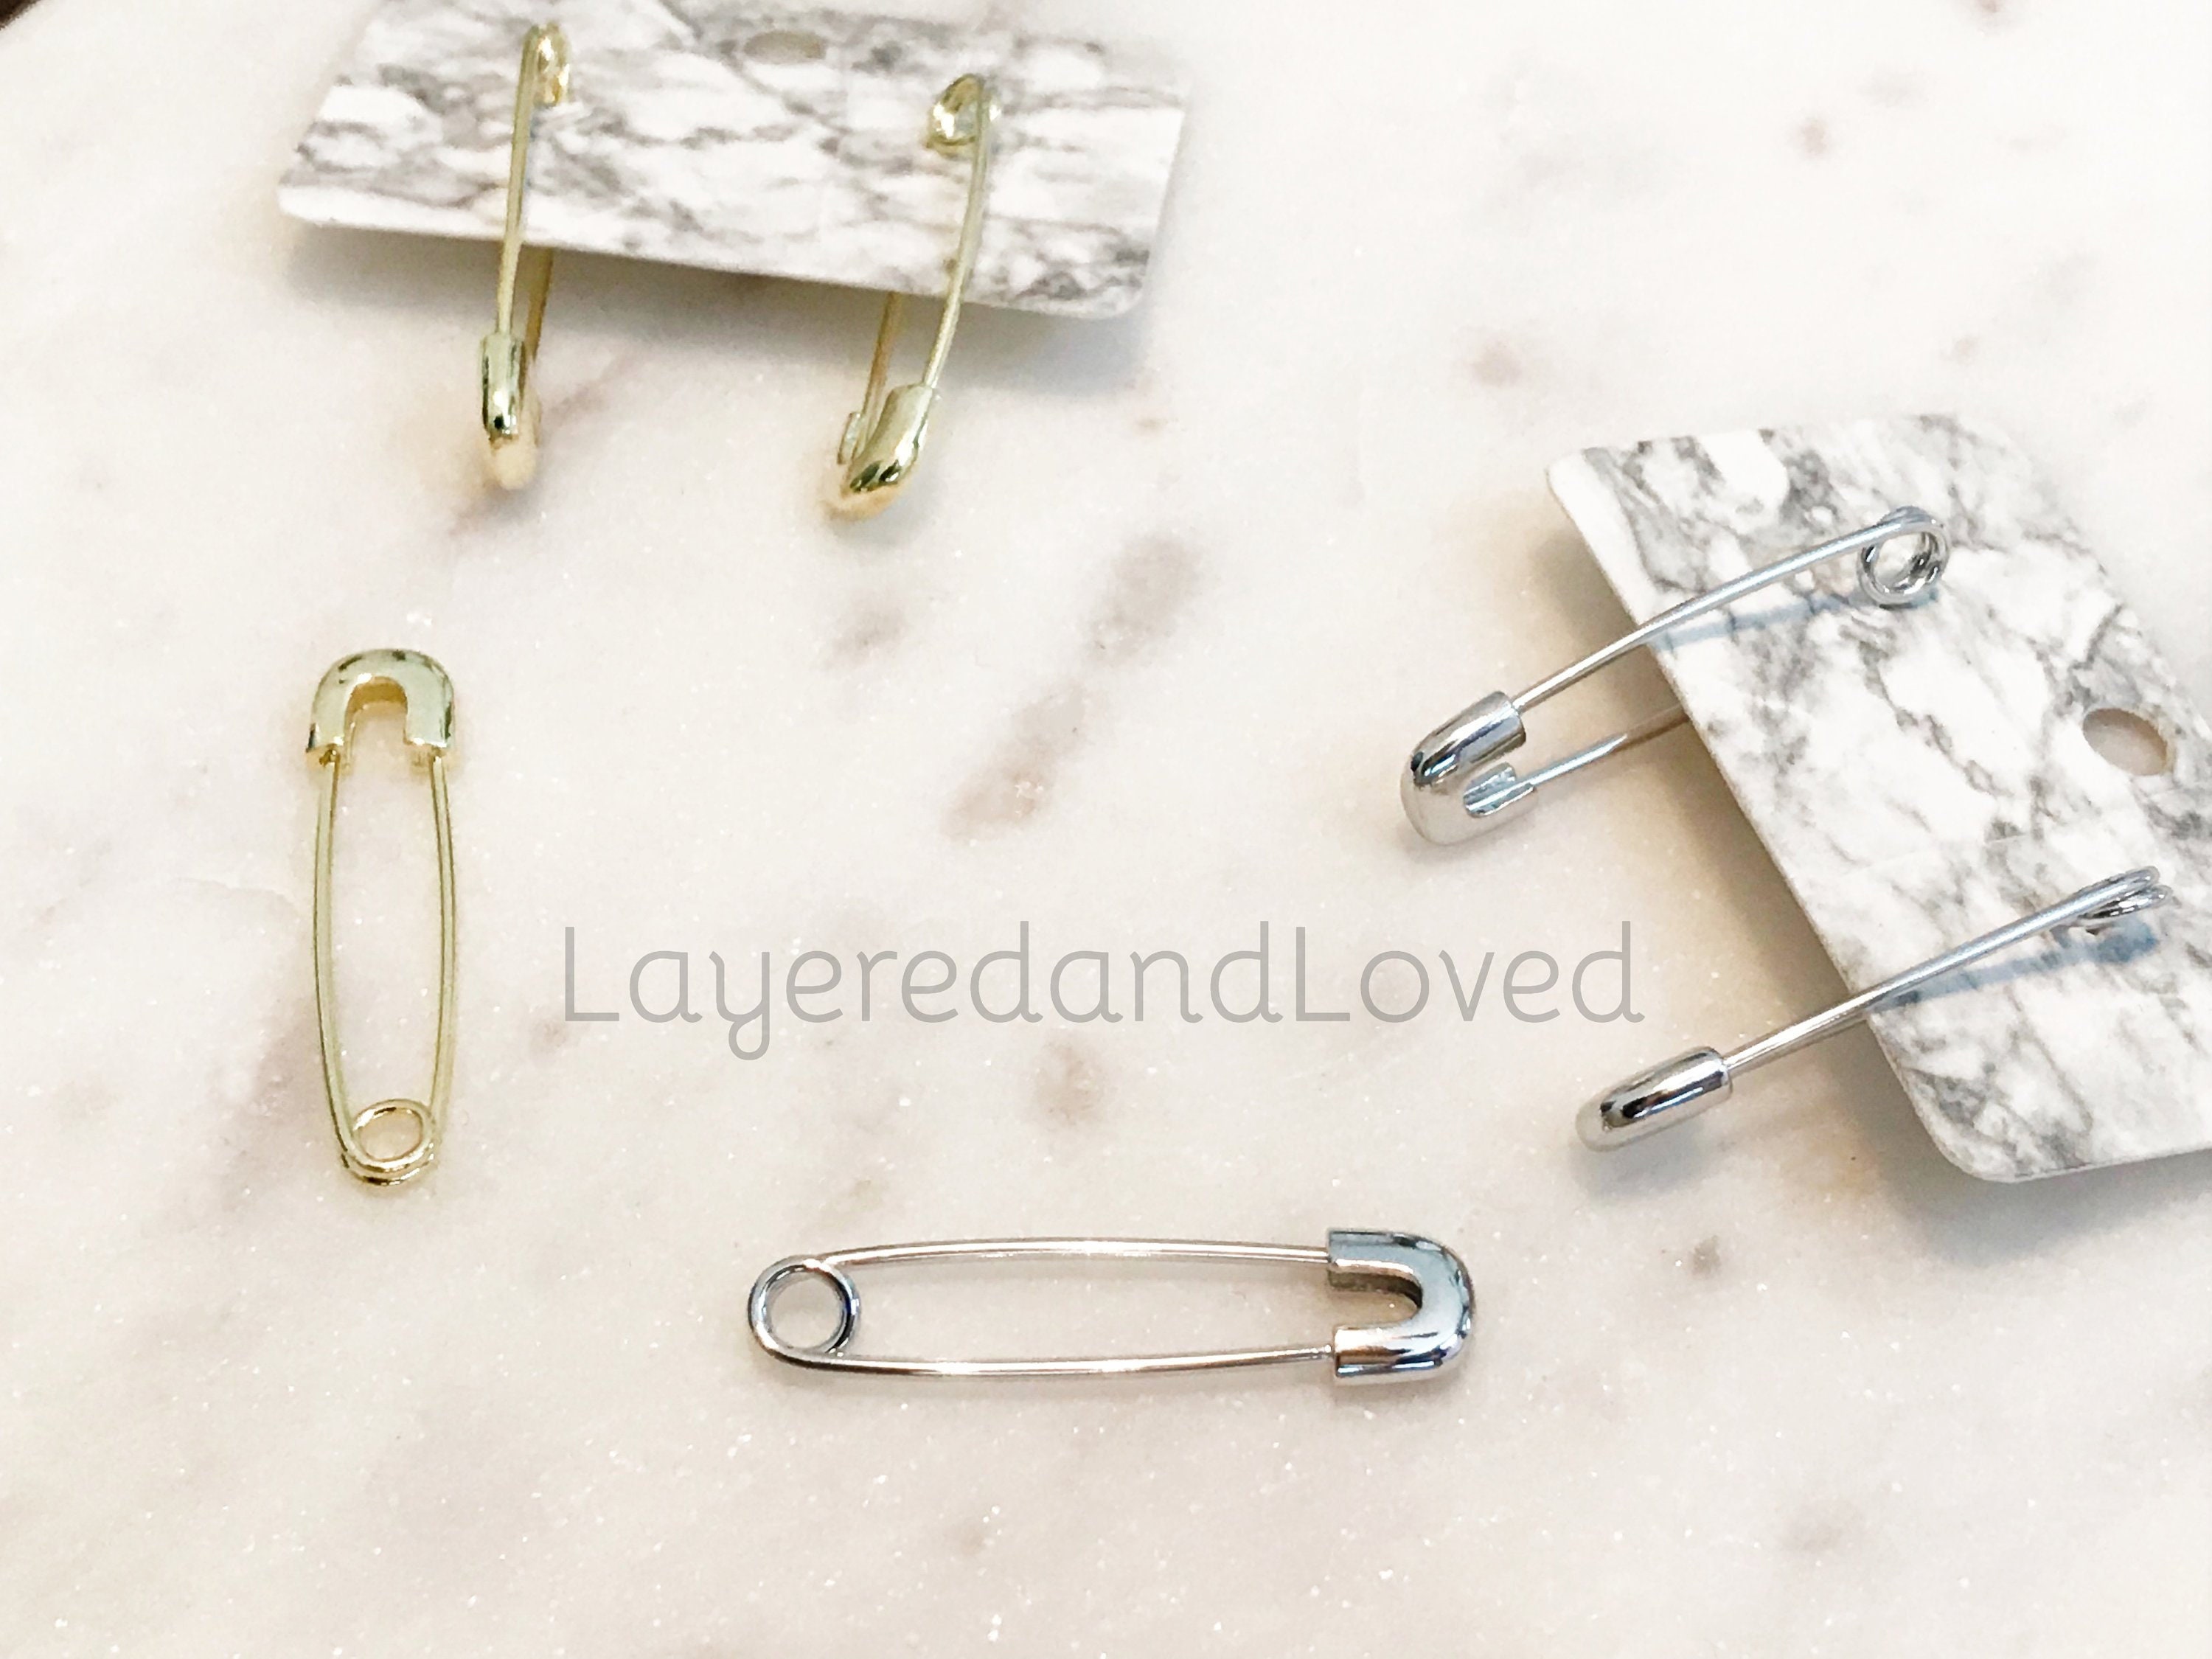 Safety Pin Earrings, Celebrity Inspired Safety Pin Earrings, Gold